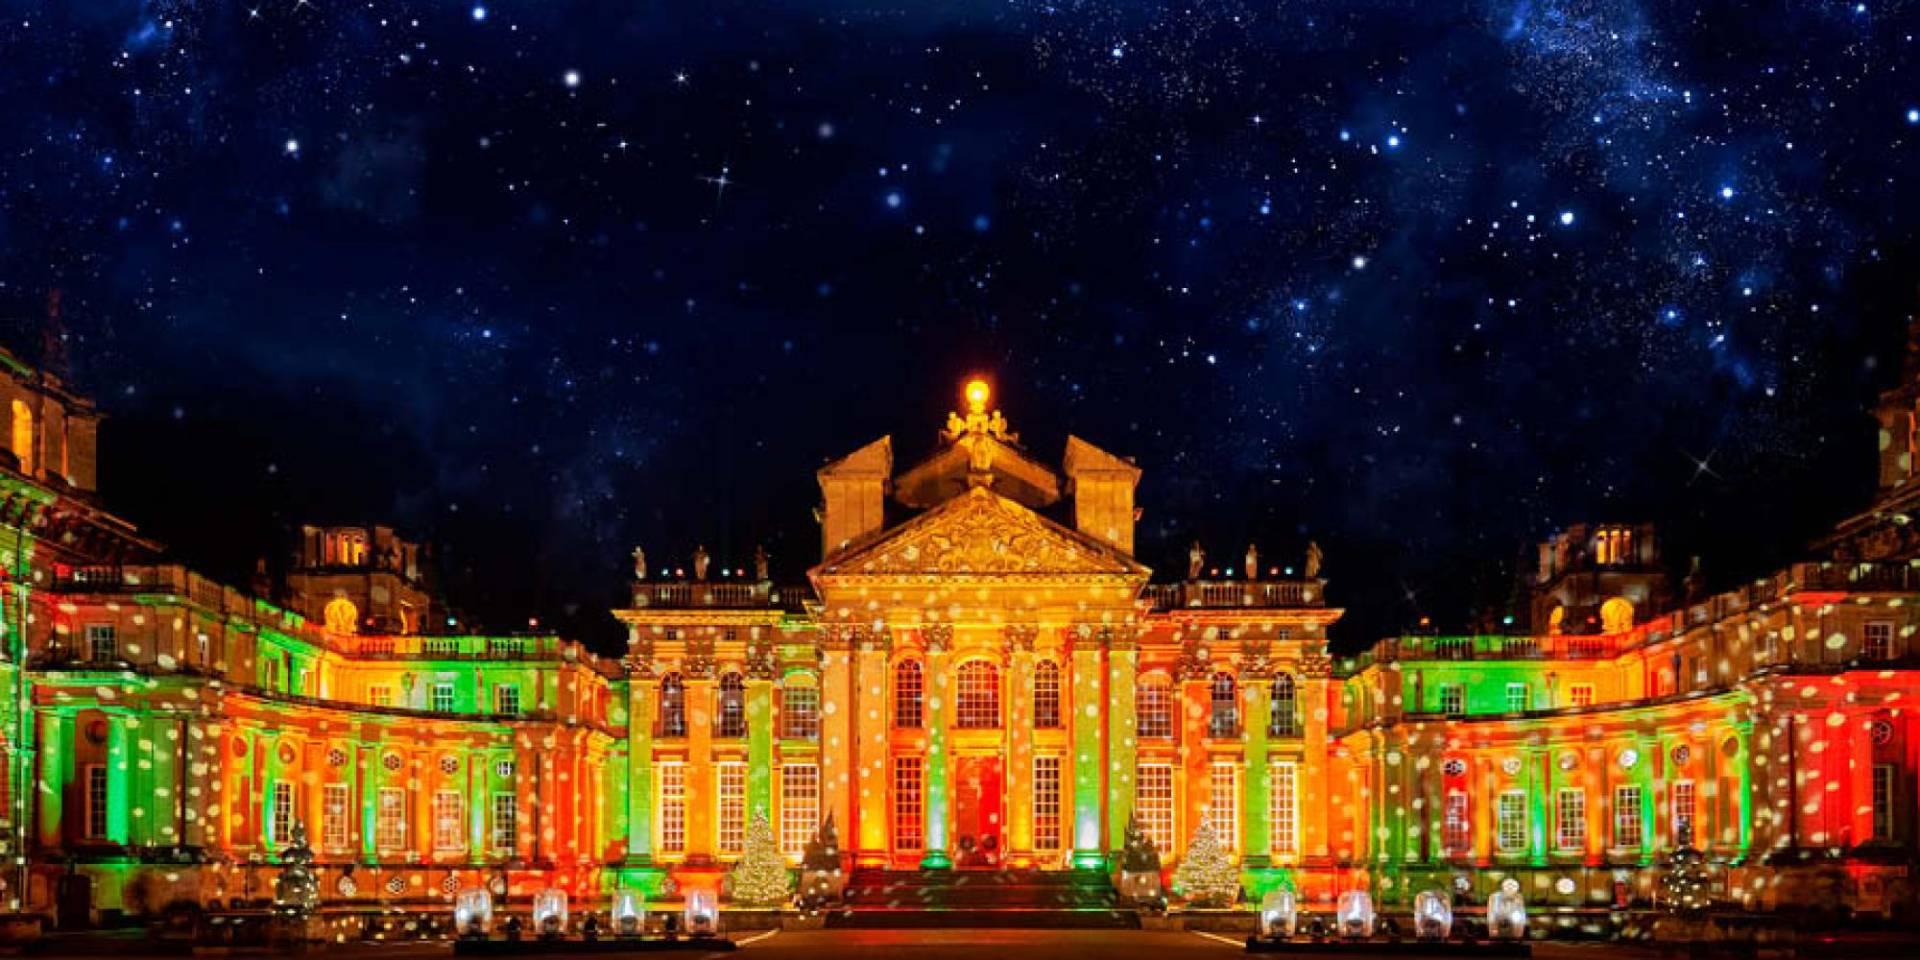 Blenheim Palace illuminated at night at Christmas in The Cotswolds.